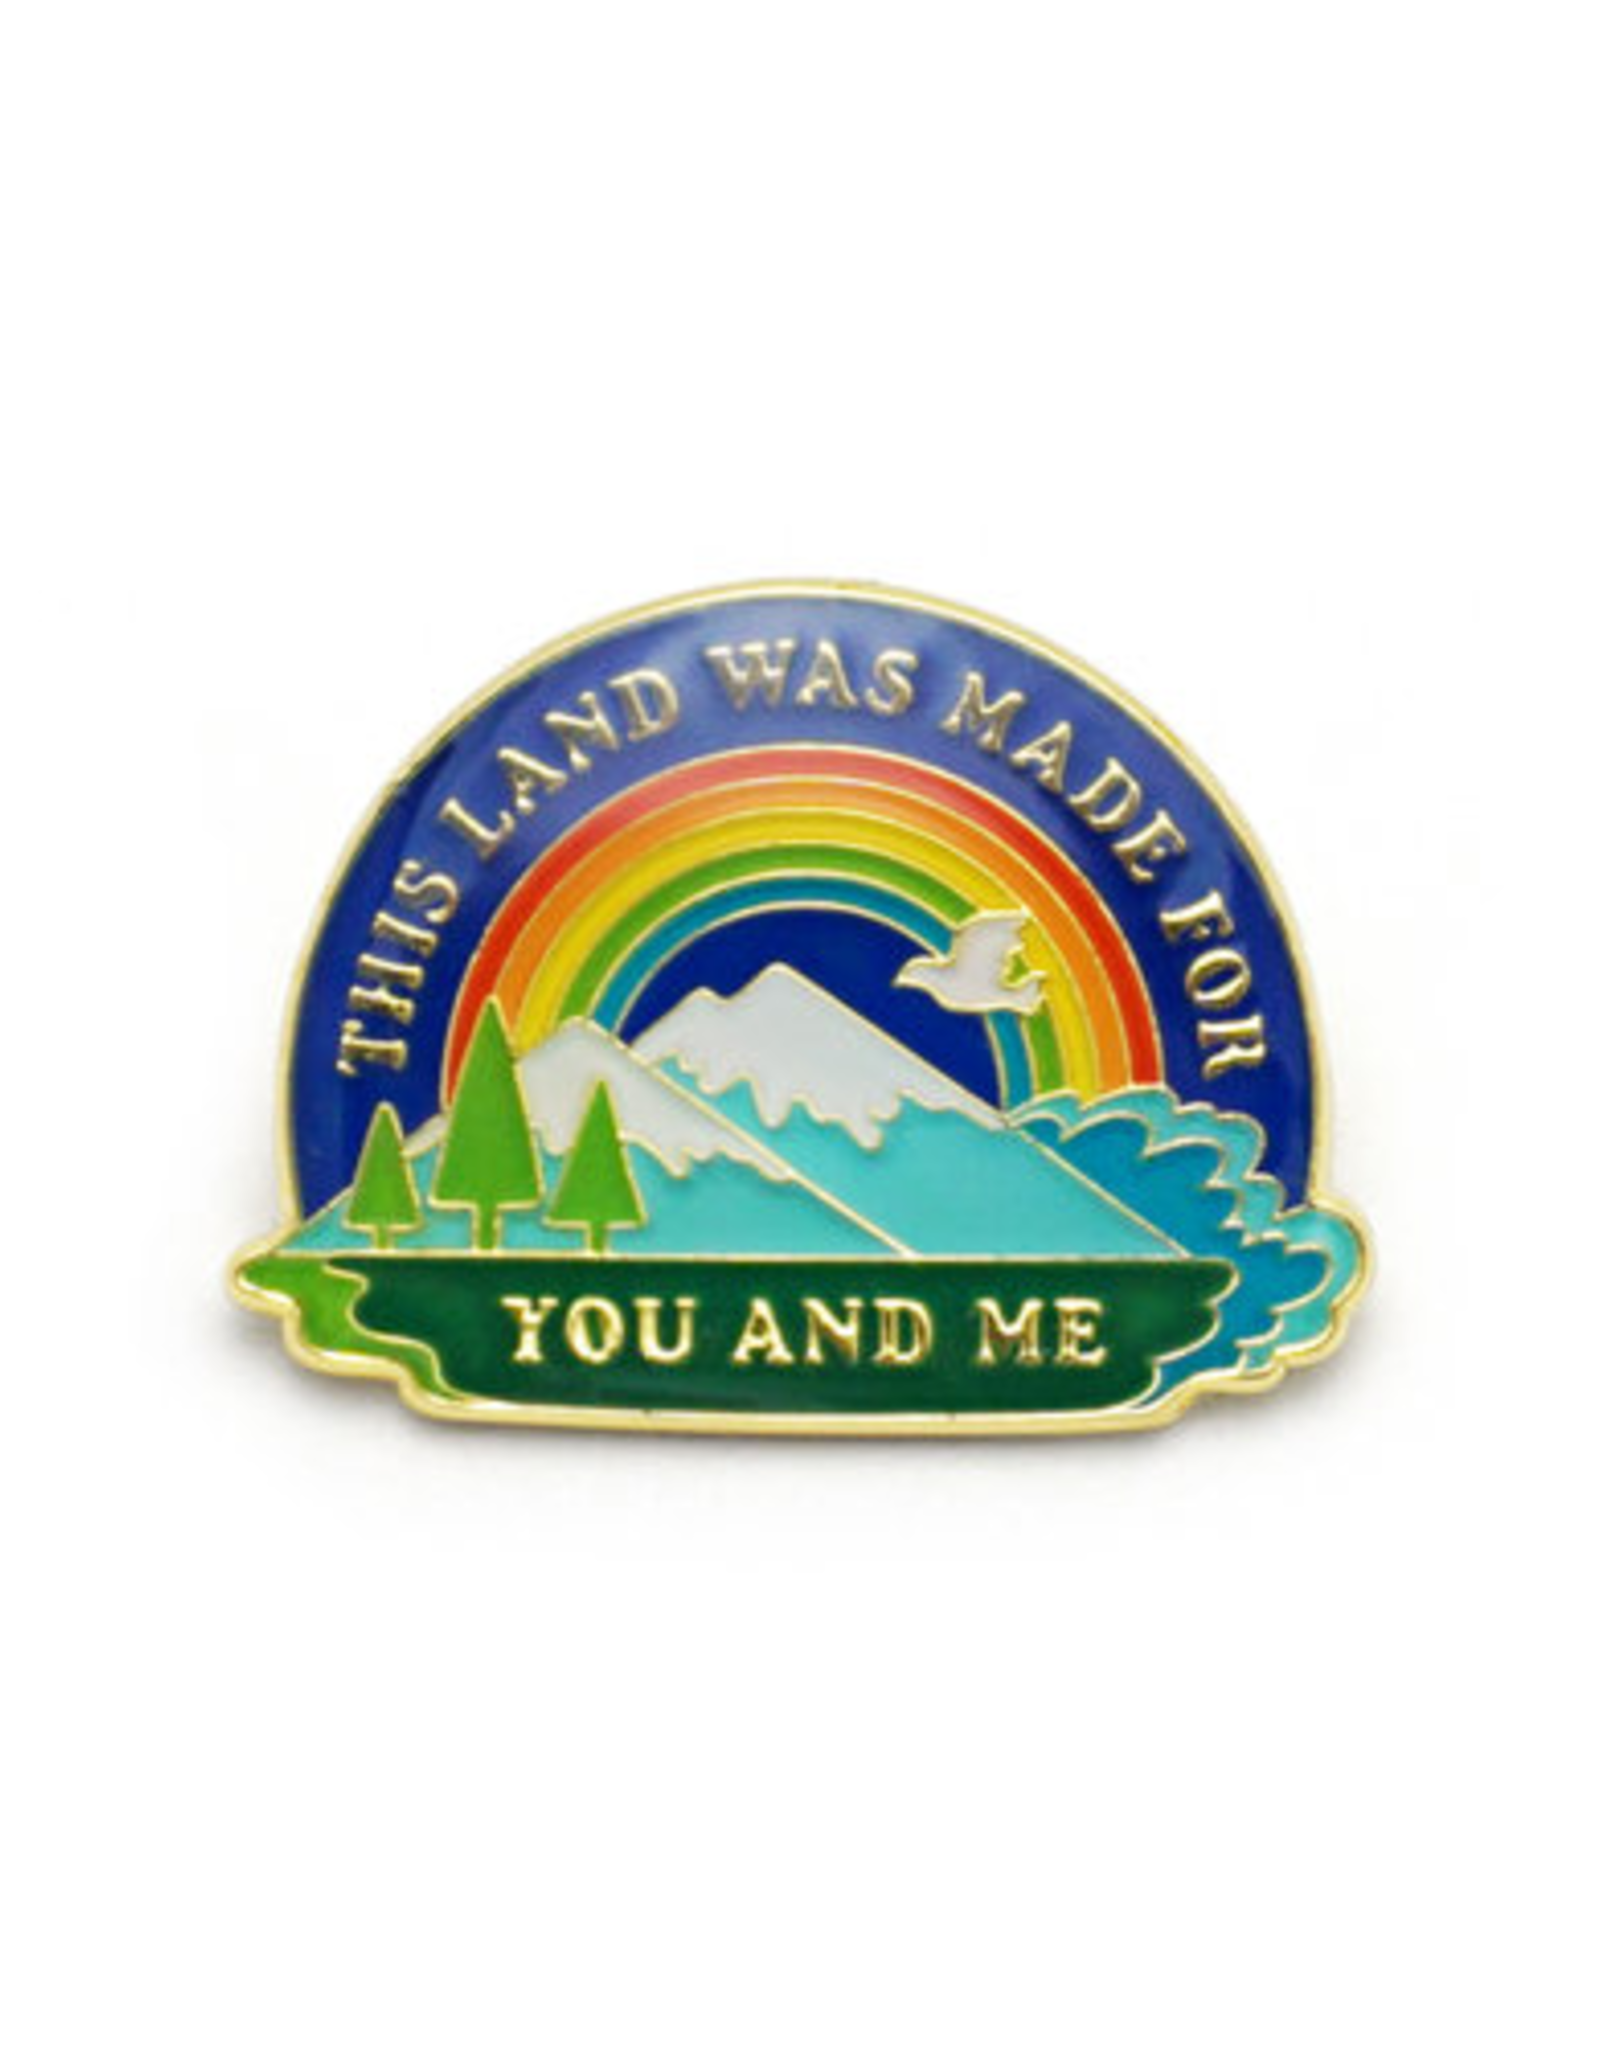 This Land Was Made For You And Me Enamel Pin